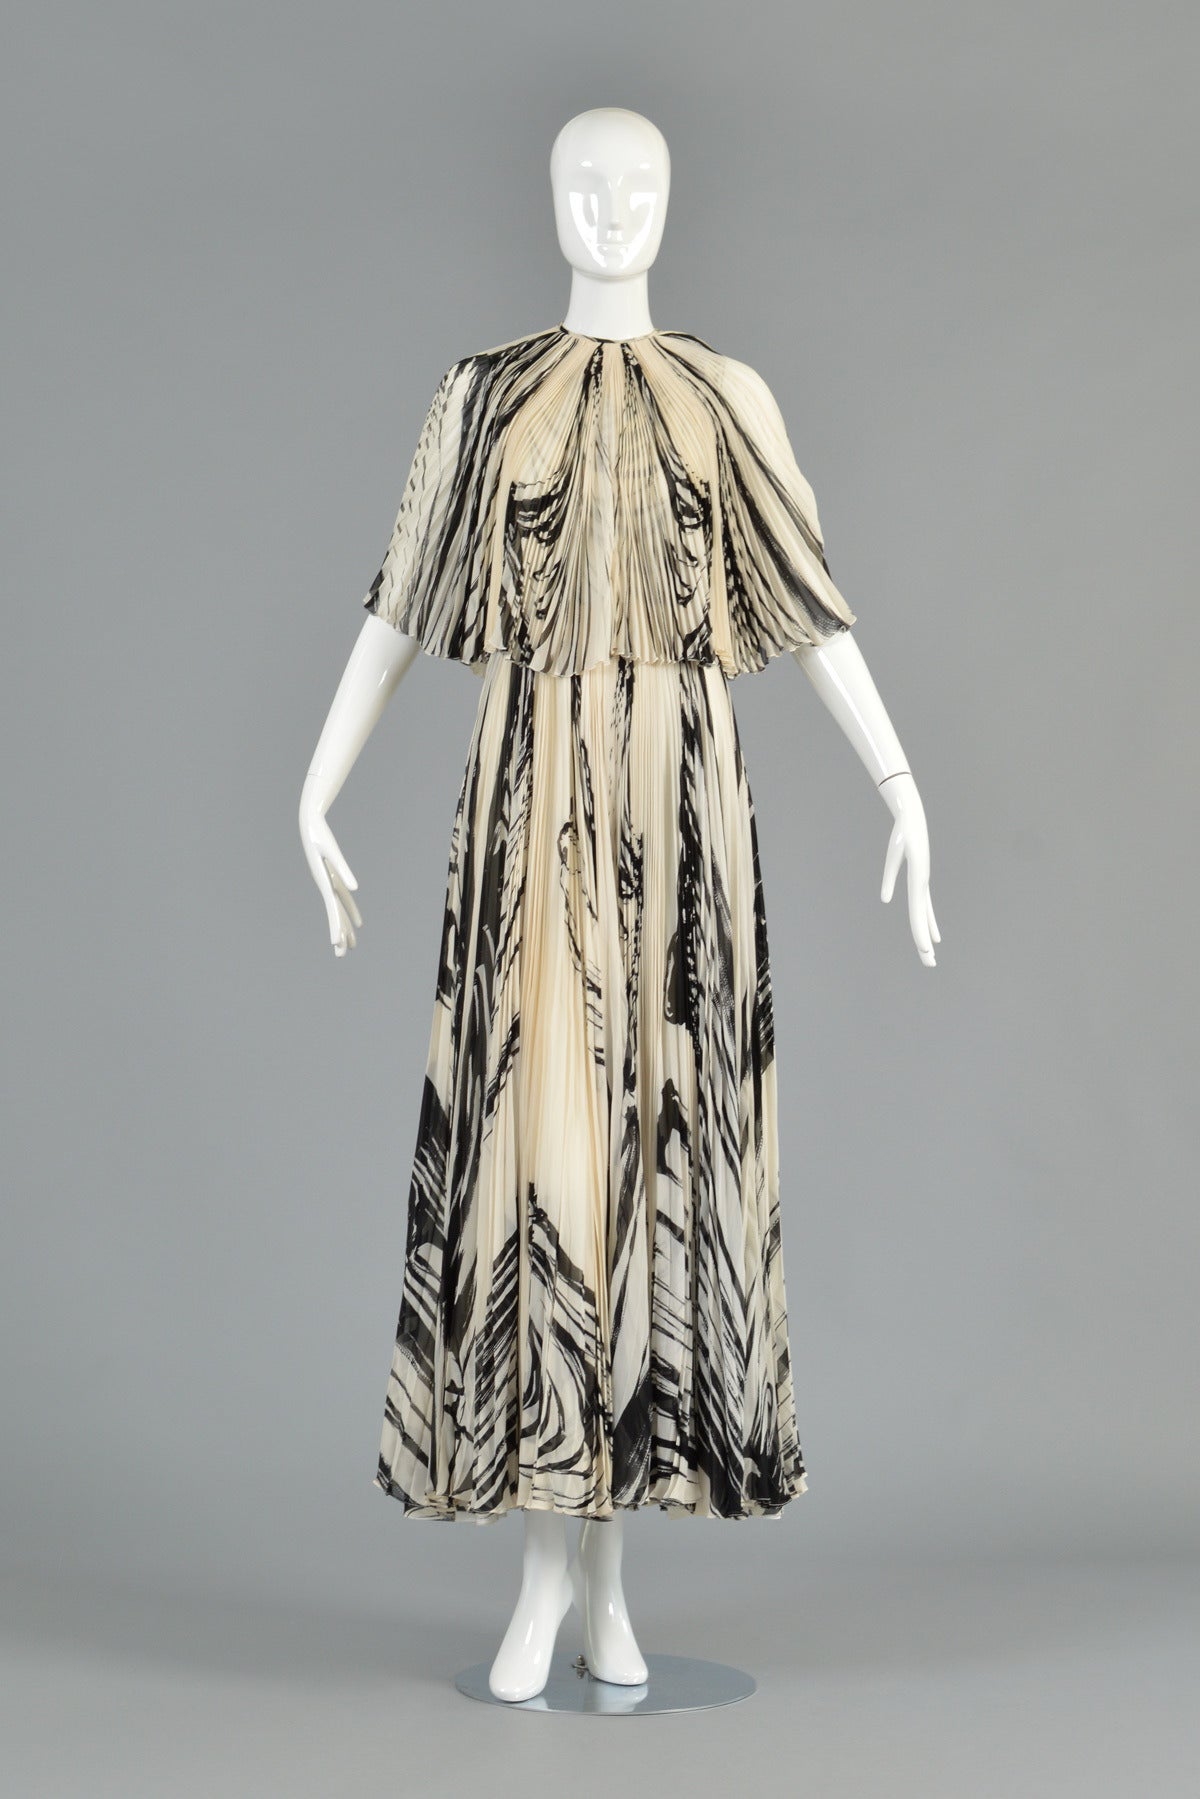 Show-stopping vintage 1960s silk gown by La Mendola. Stunning floor length maxi gown with fully pleated, full-sweep skirt. Matching pleated capelet jacket. Incredible black + white graphic pattern. Made in Italy. Definitely red carpet worthy -- one